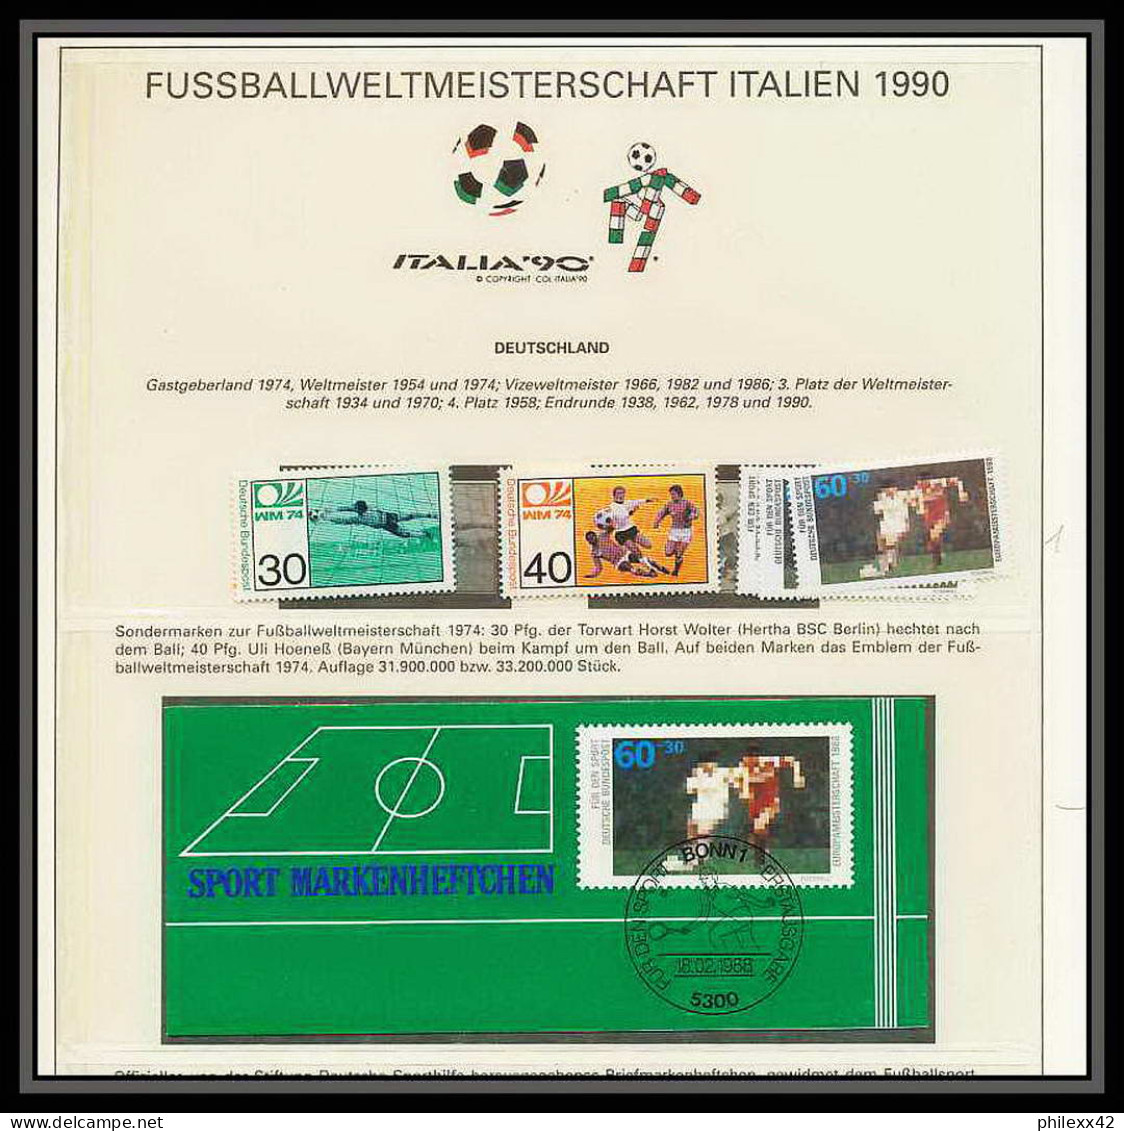 164 Football (Soccer) Italia 90 Neuf ** MNH - Allemagne (germany) / Germany - 1990 – Italien